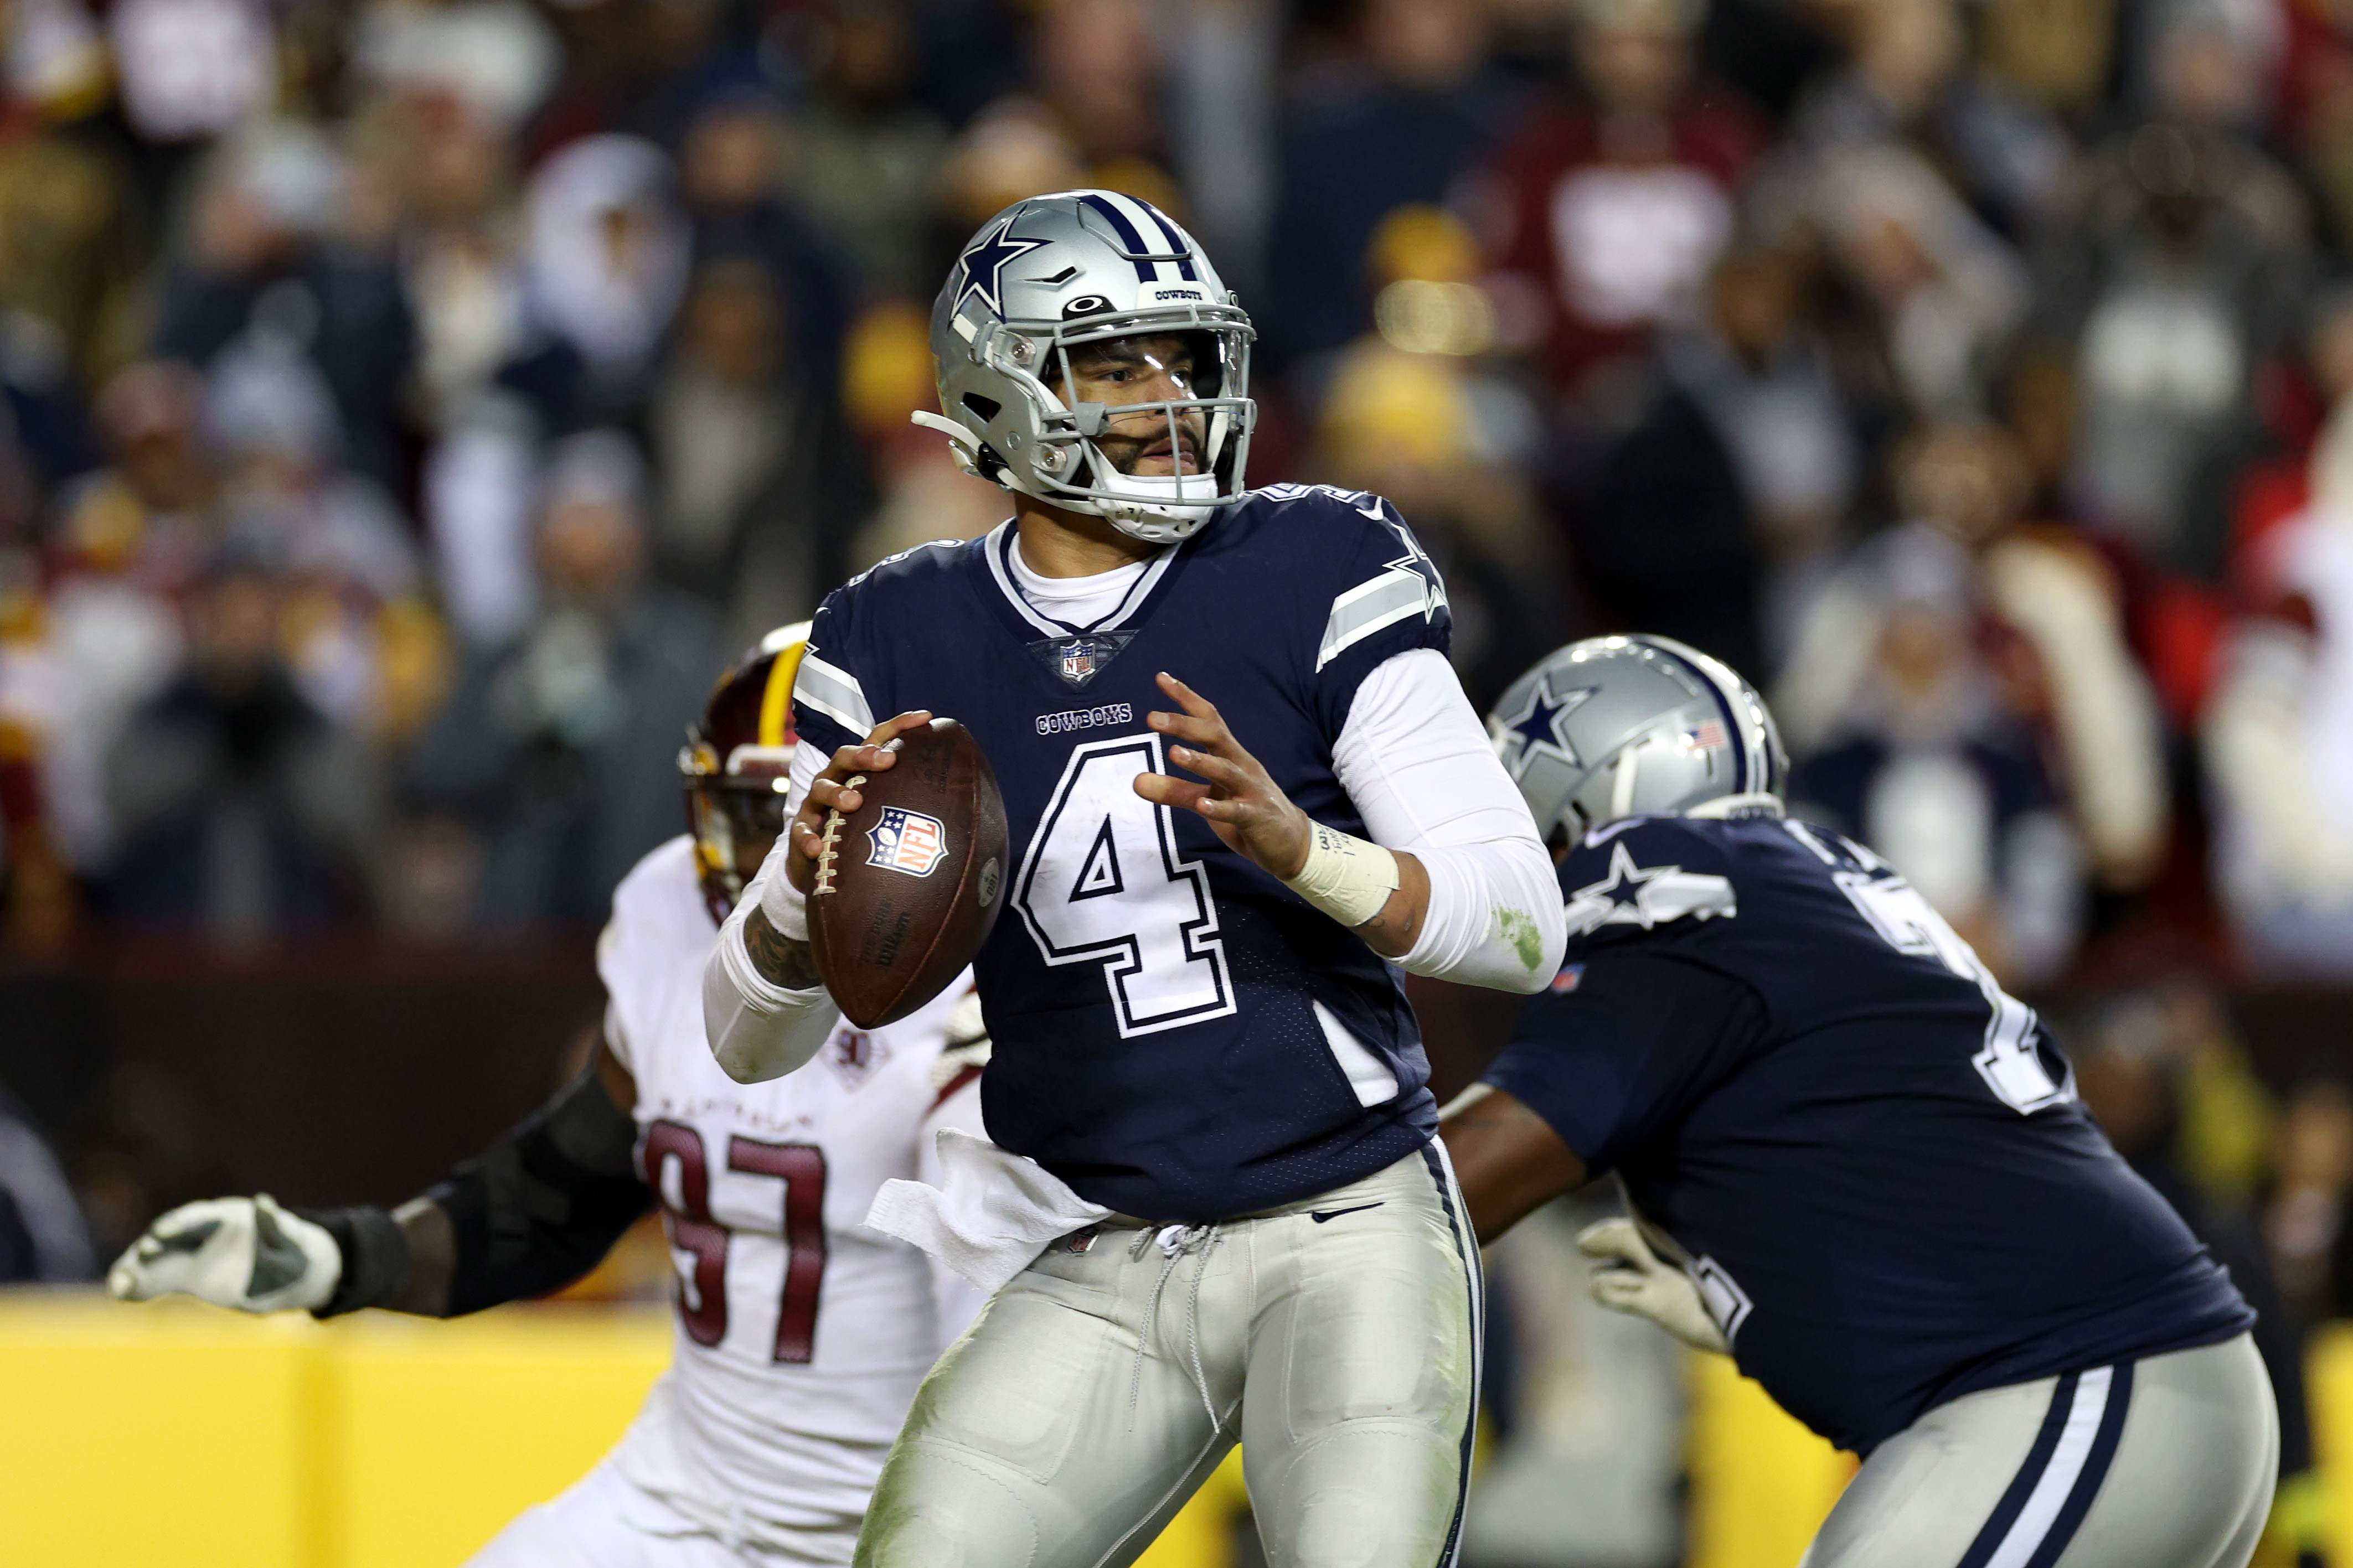 'Merica's Team: How much is riding on this playoff game for Dak Prescott?